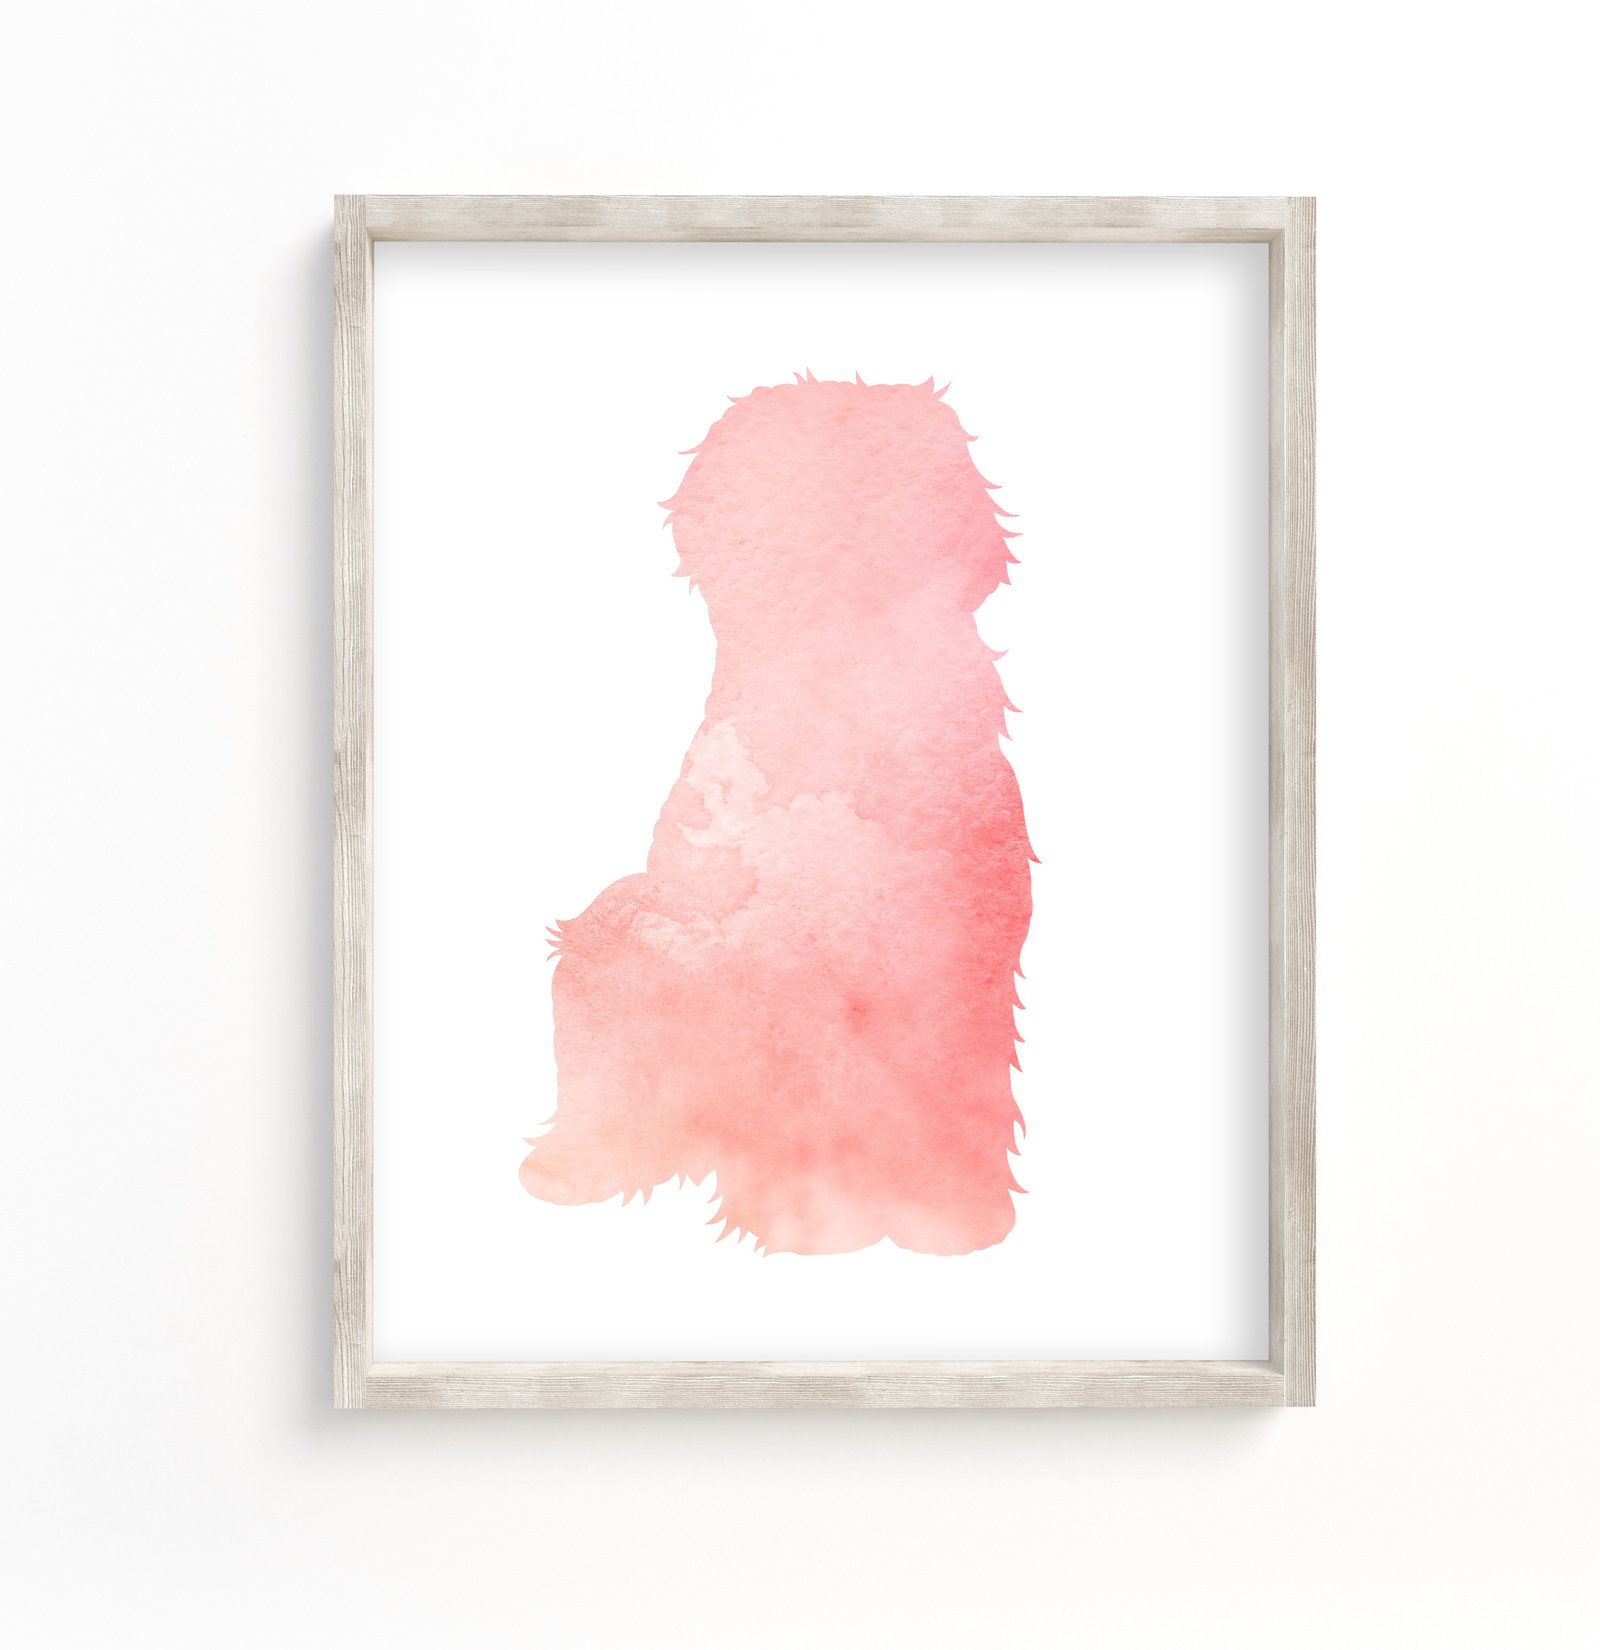 art print featuring a pink goldendoodle silhouette